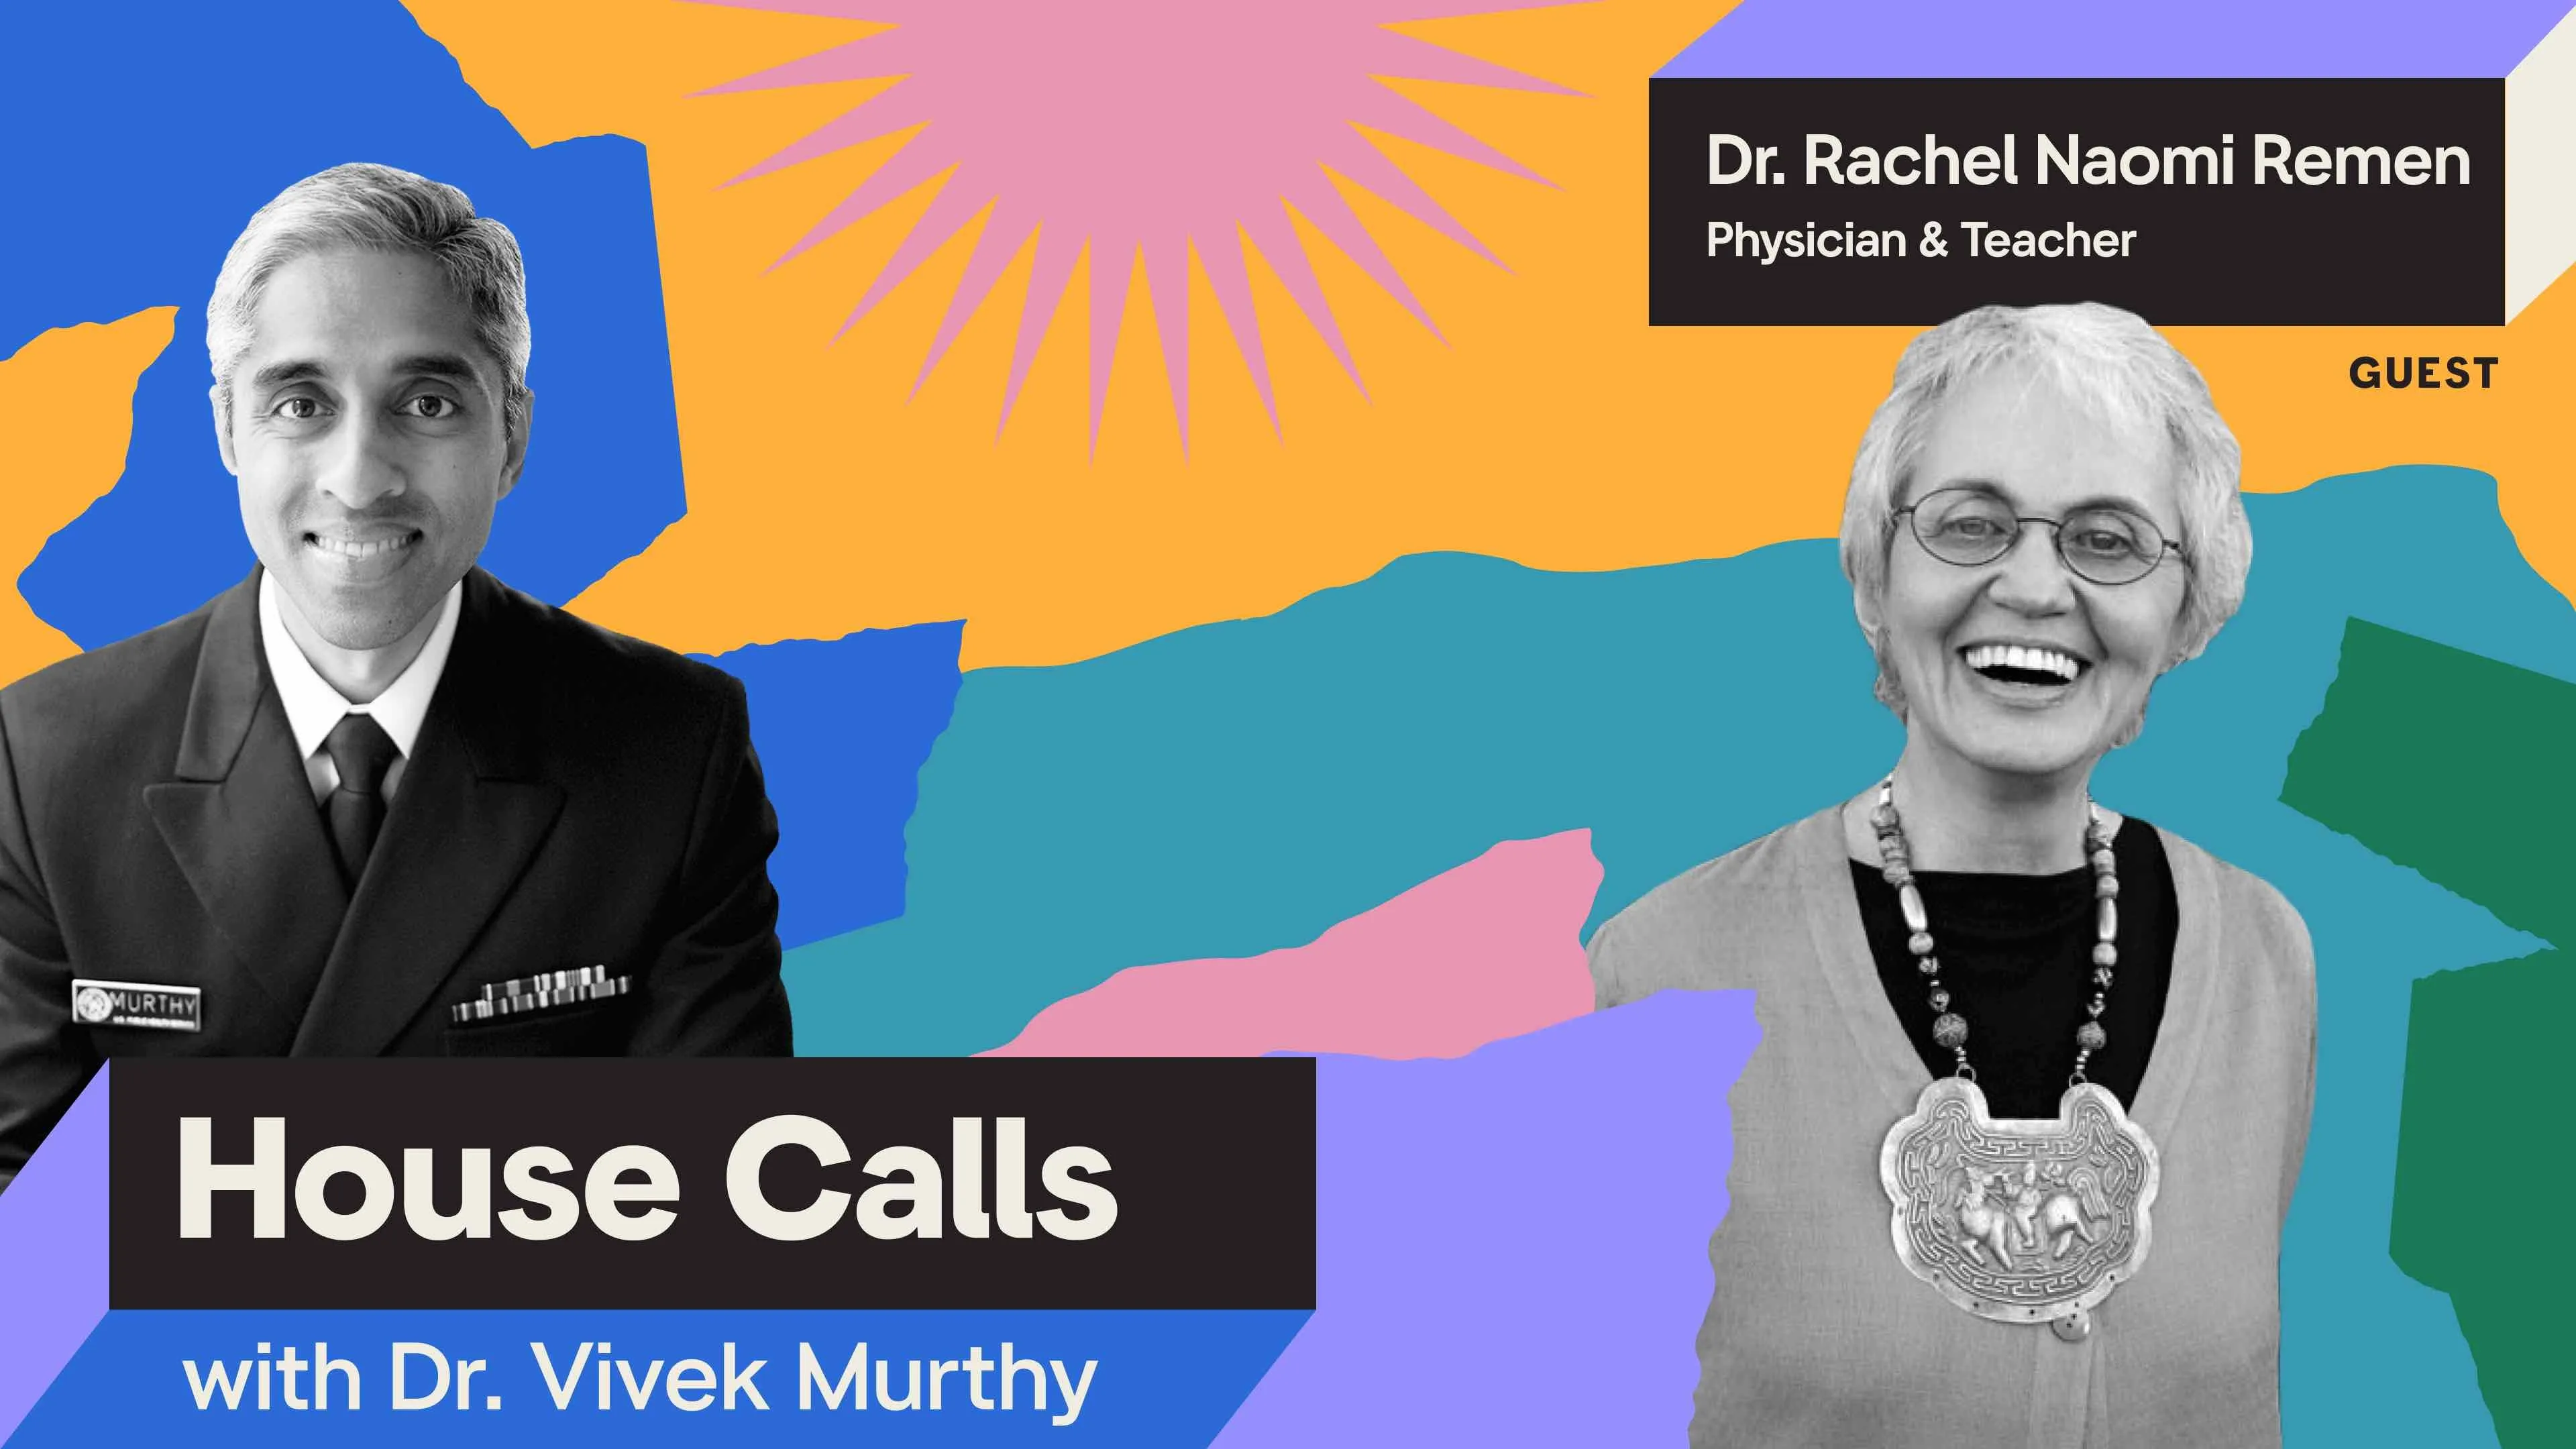 Black and white portraits of Surgeon General Vivek Murthy and Dr. Rachel Naomi Remen with a colorful background.